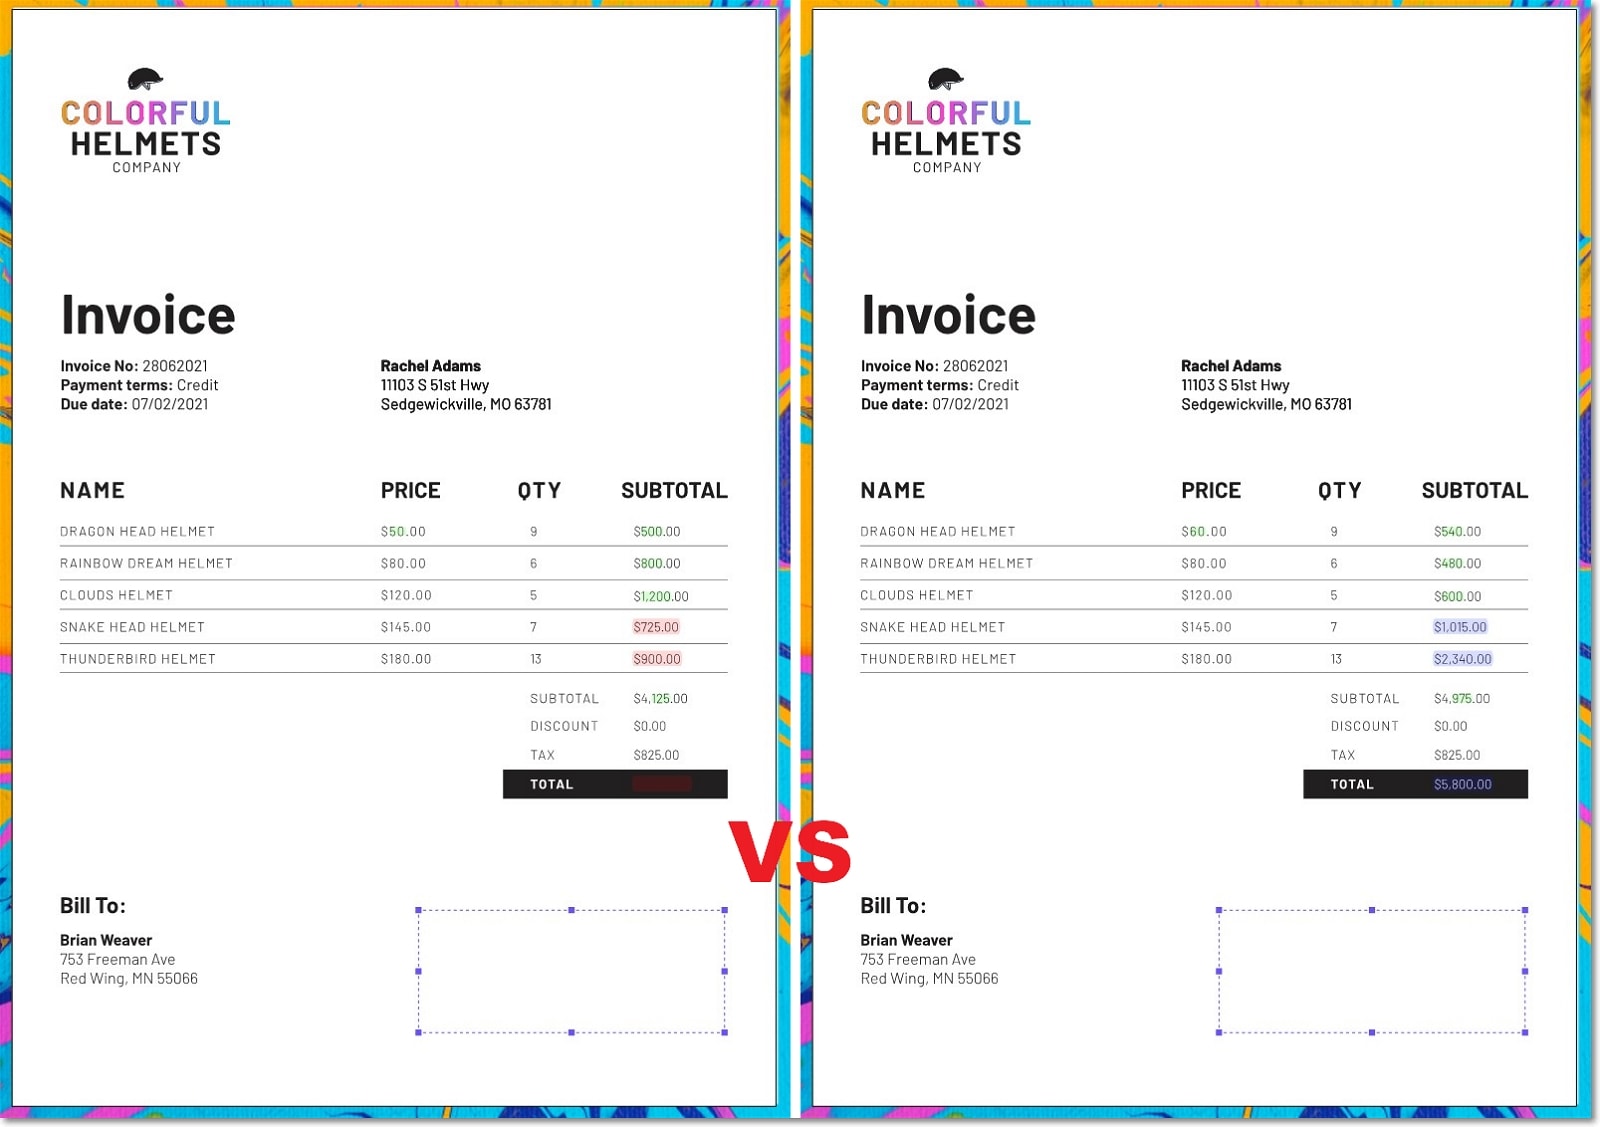 compare pdf side by side